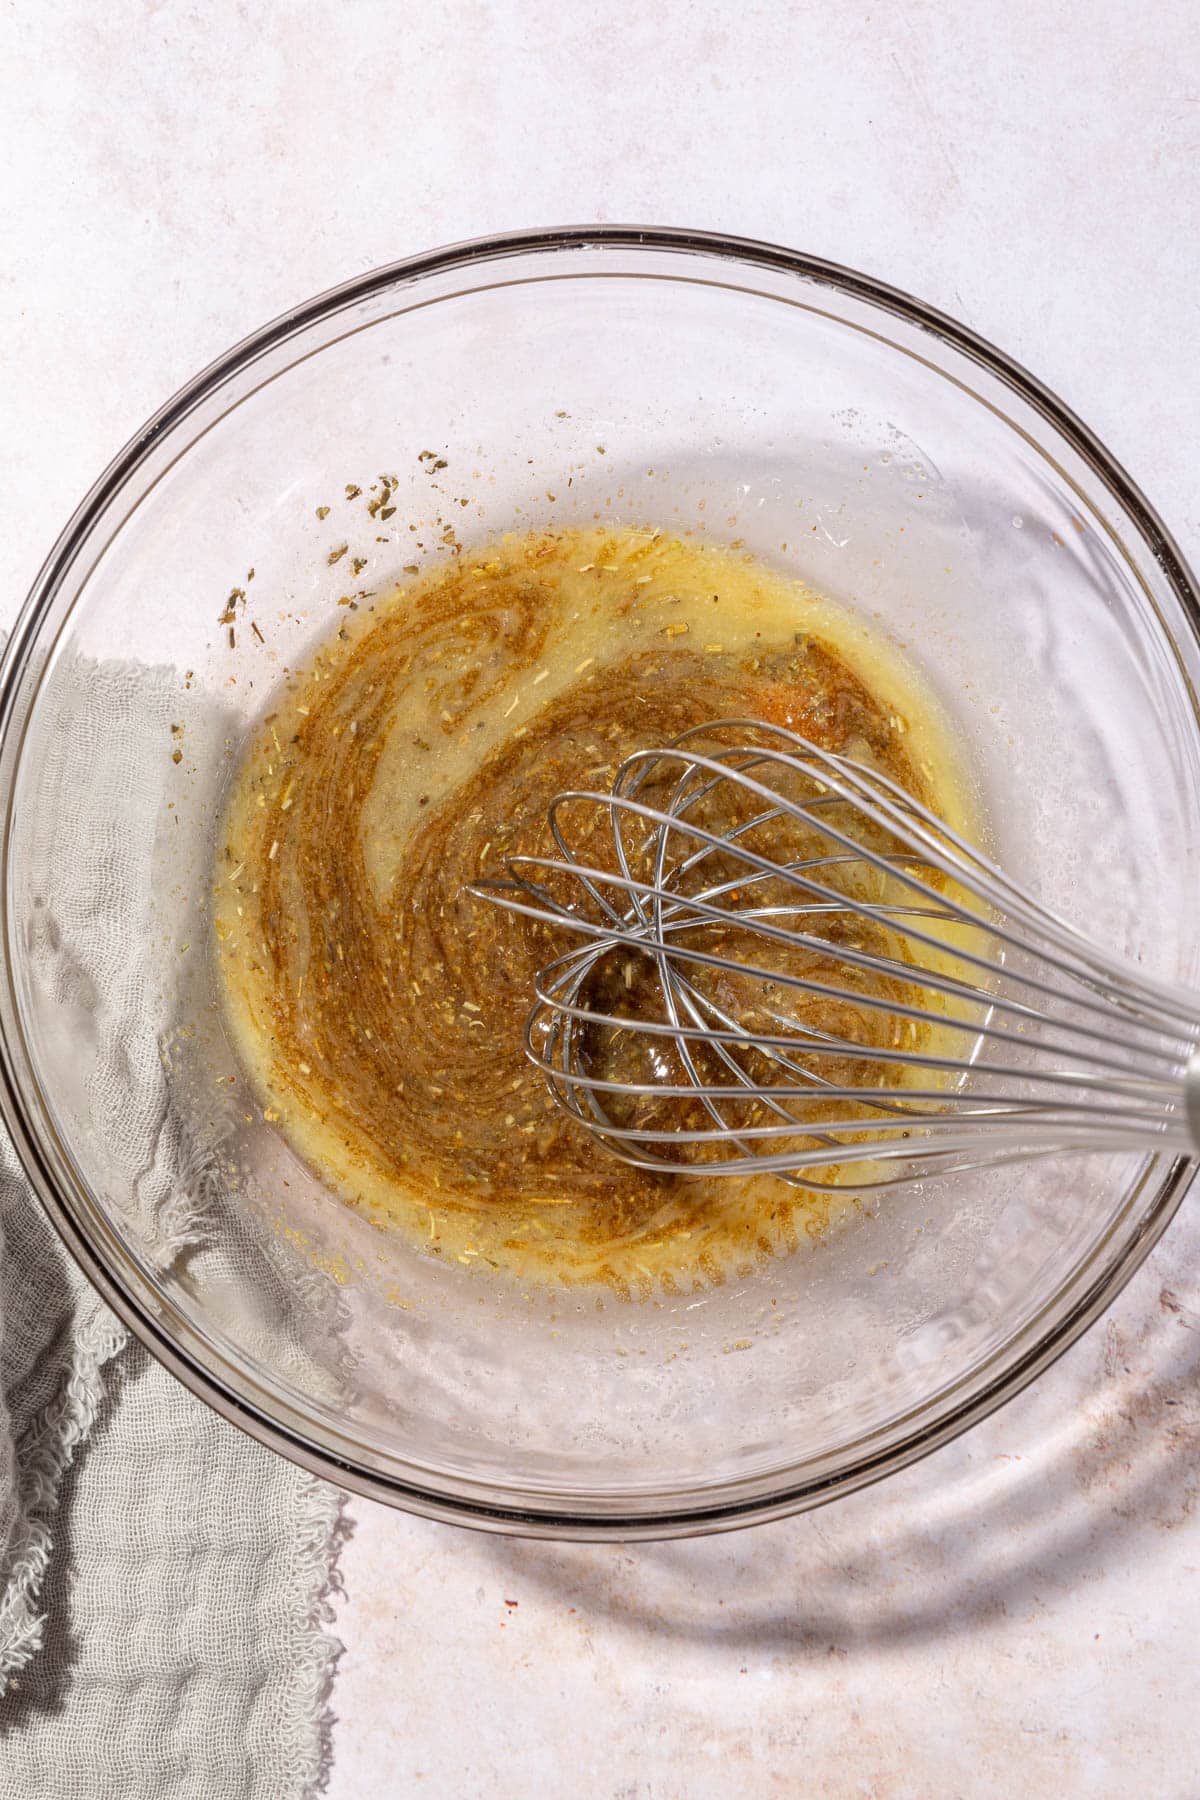 A glass bowl with a melted butter and spice mixture that is being whisked.